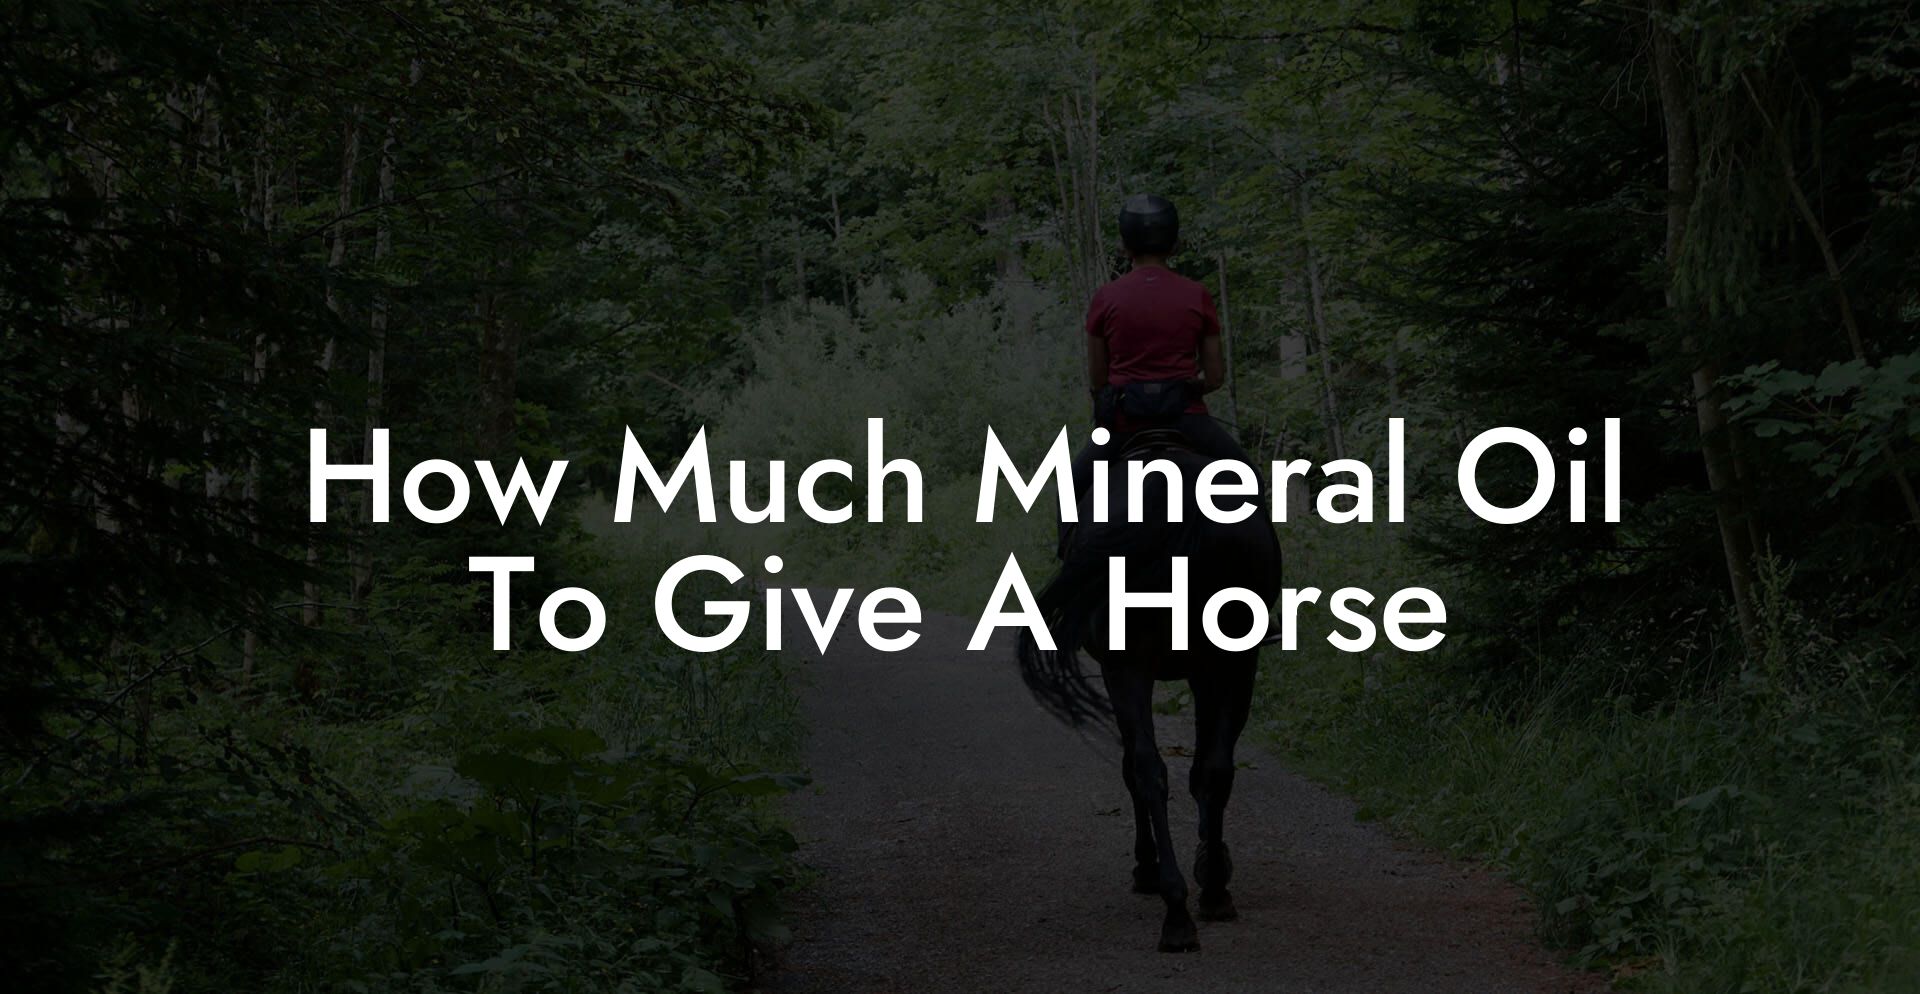 How Much Mineral Oil To Give A Horse